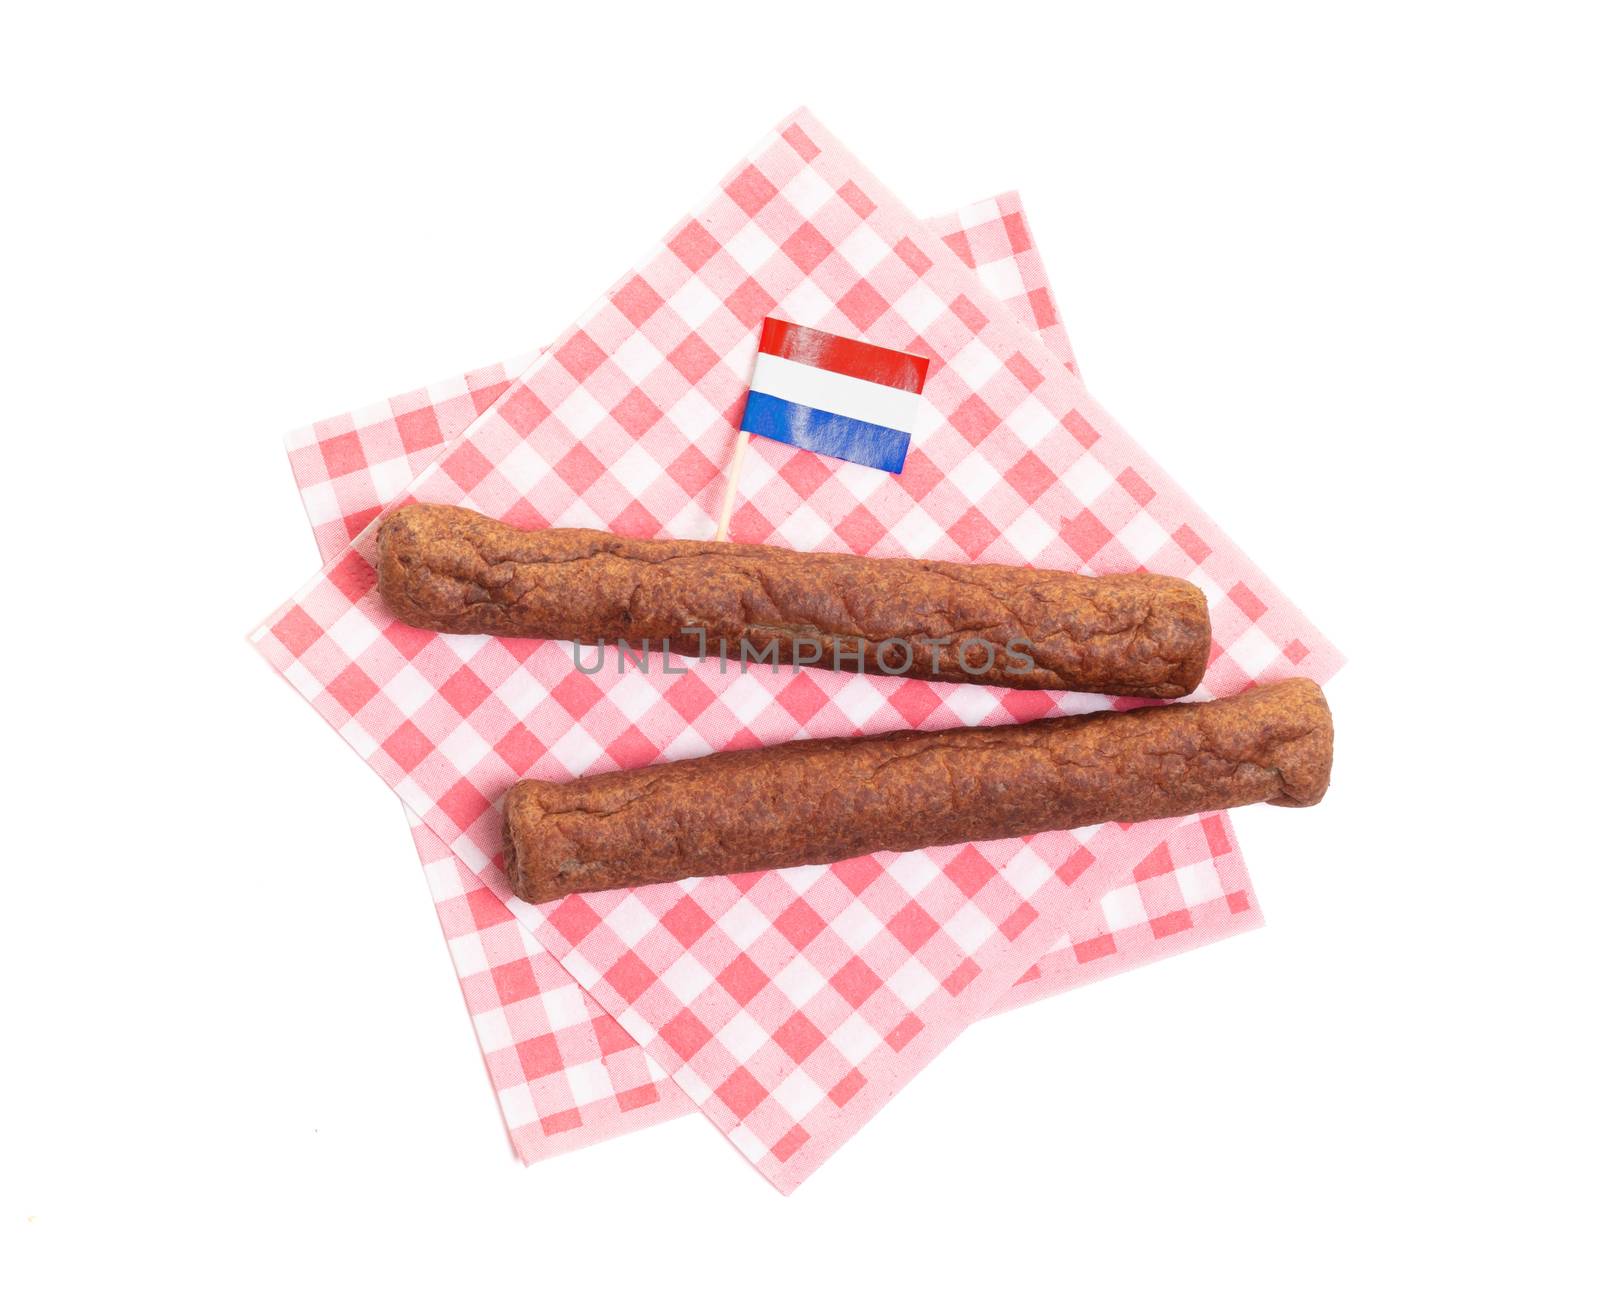 Two frikadellen on a napkin, a Dutch fast food snack, isolated